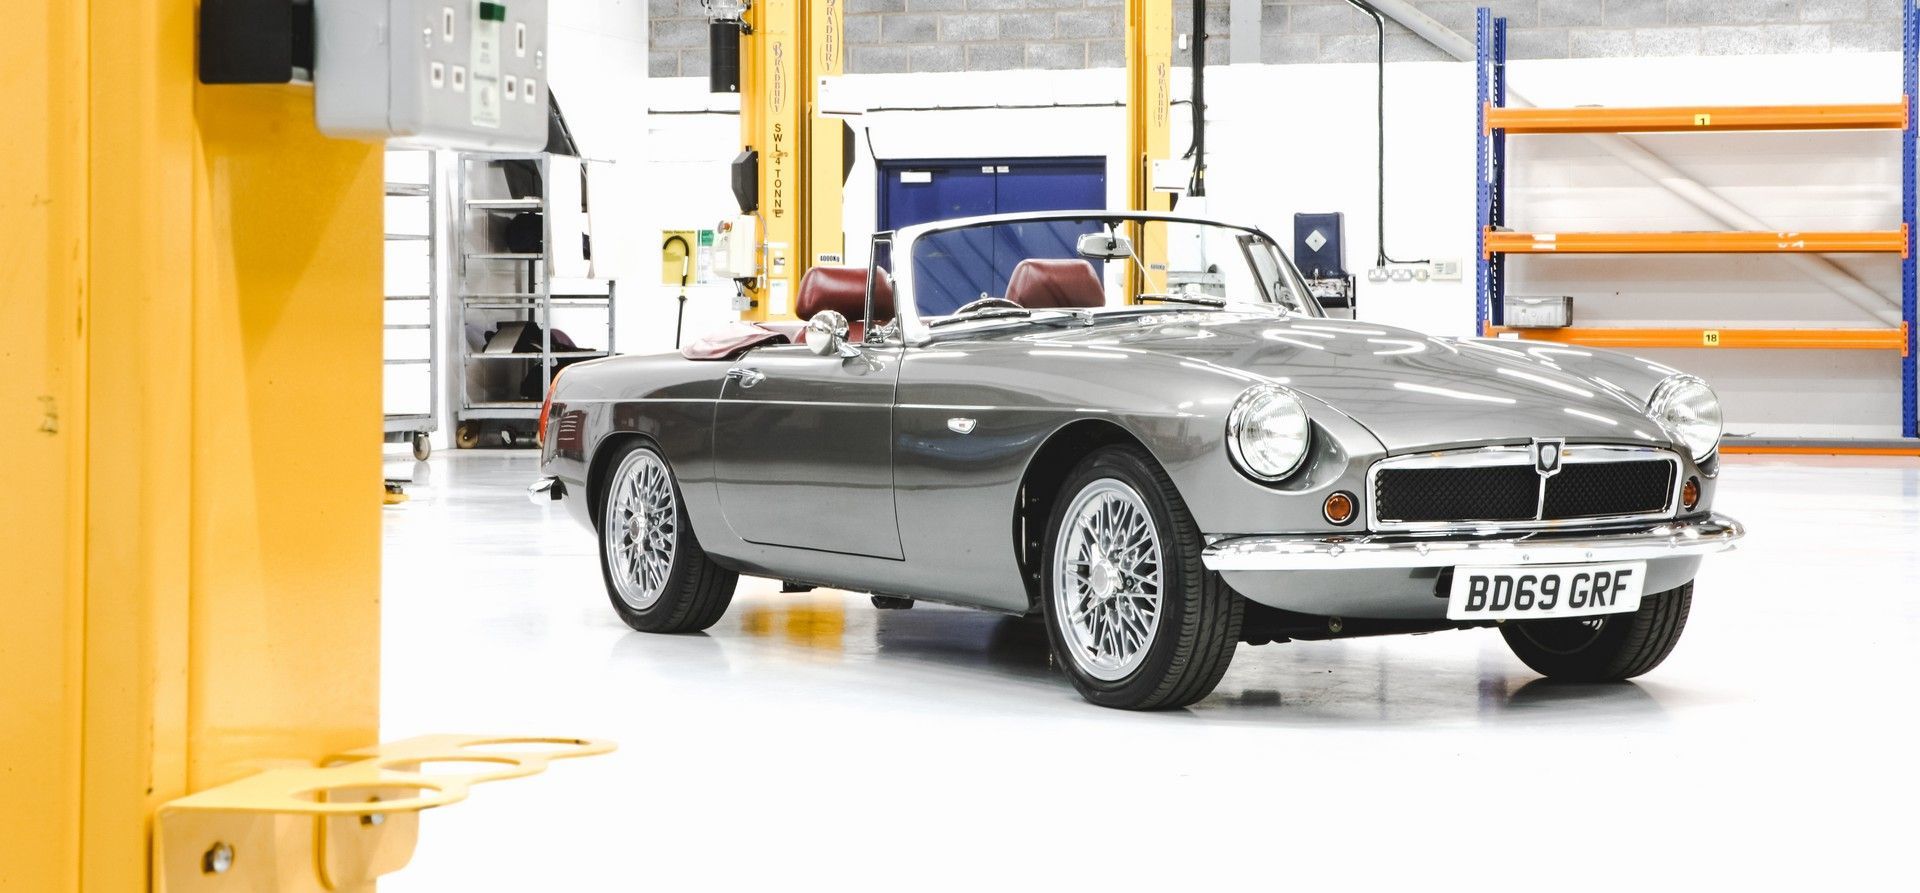 Conversion of the MGB Roadster to an electric car